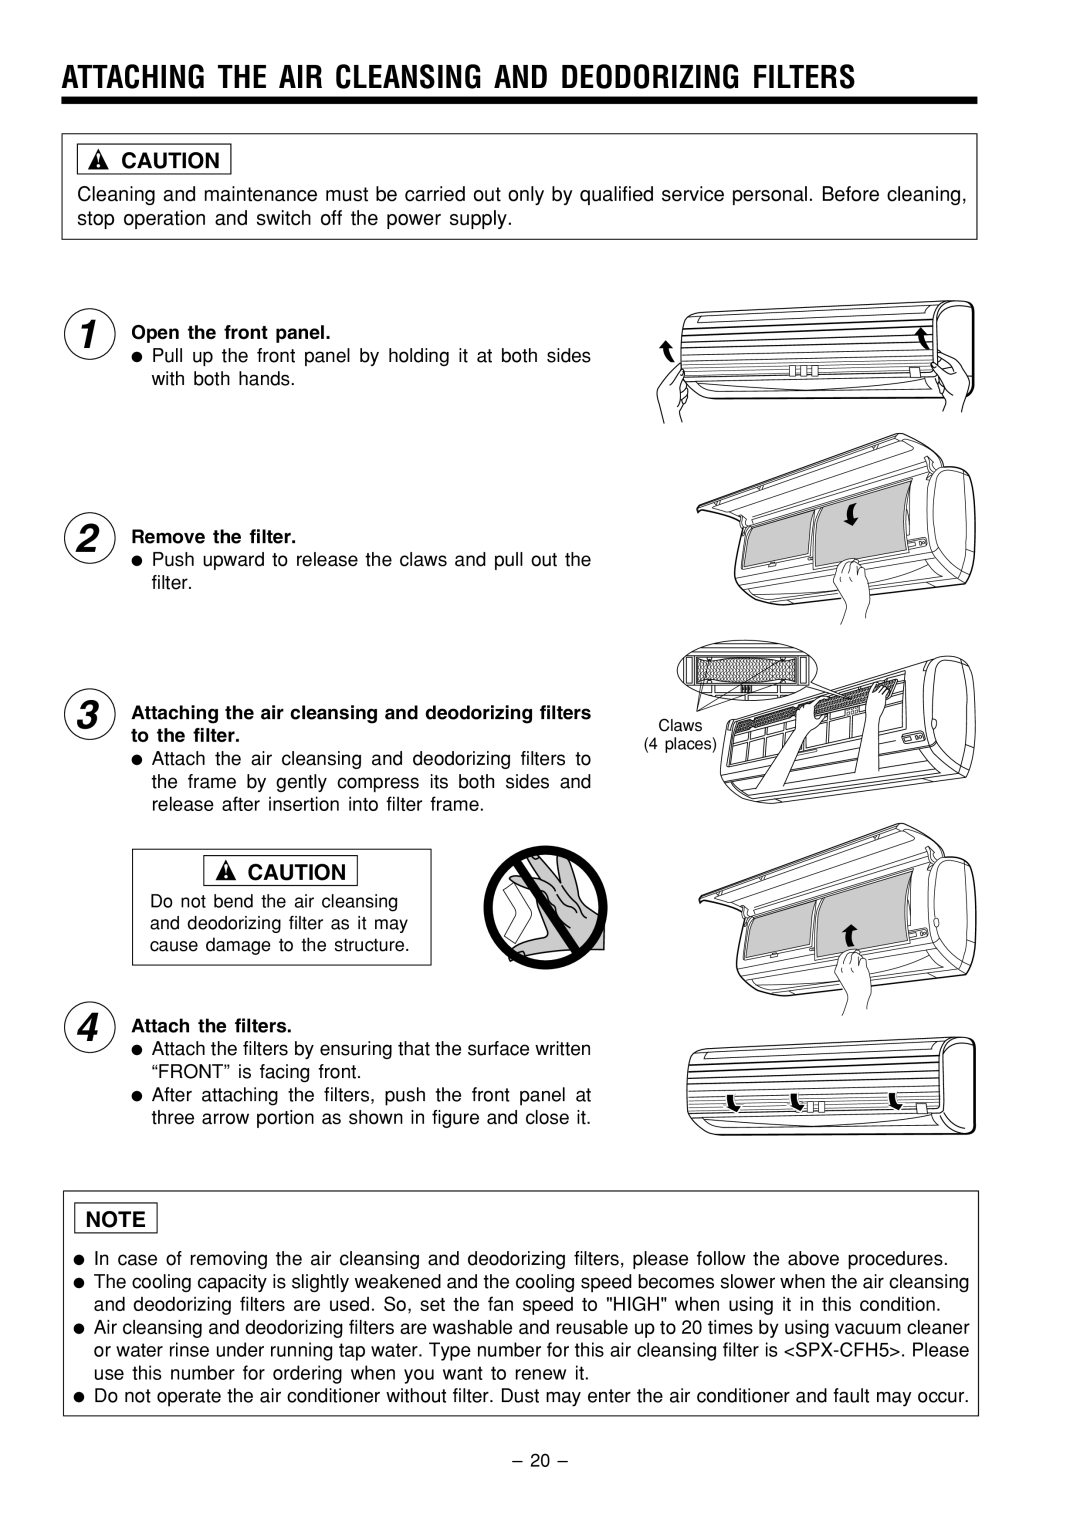 Hitachi RAS-51CHA3 instruction manual Open the front panel, Remove the filter, Attach the filters 